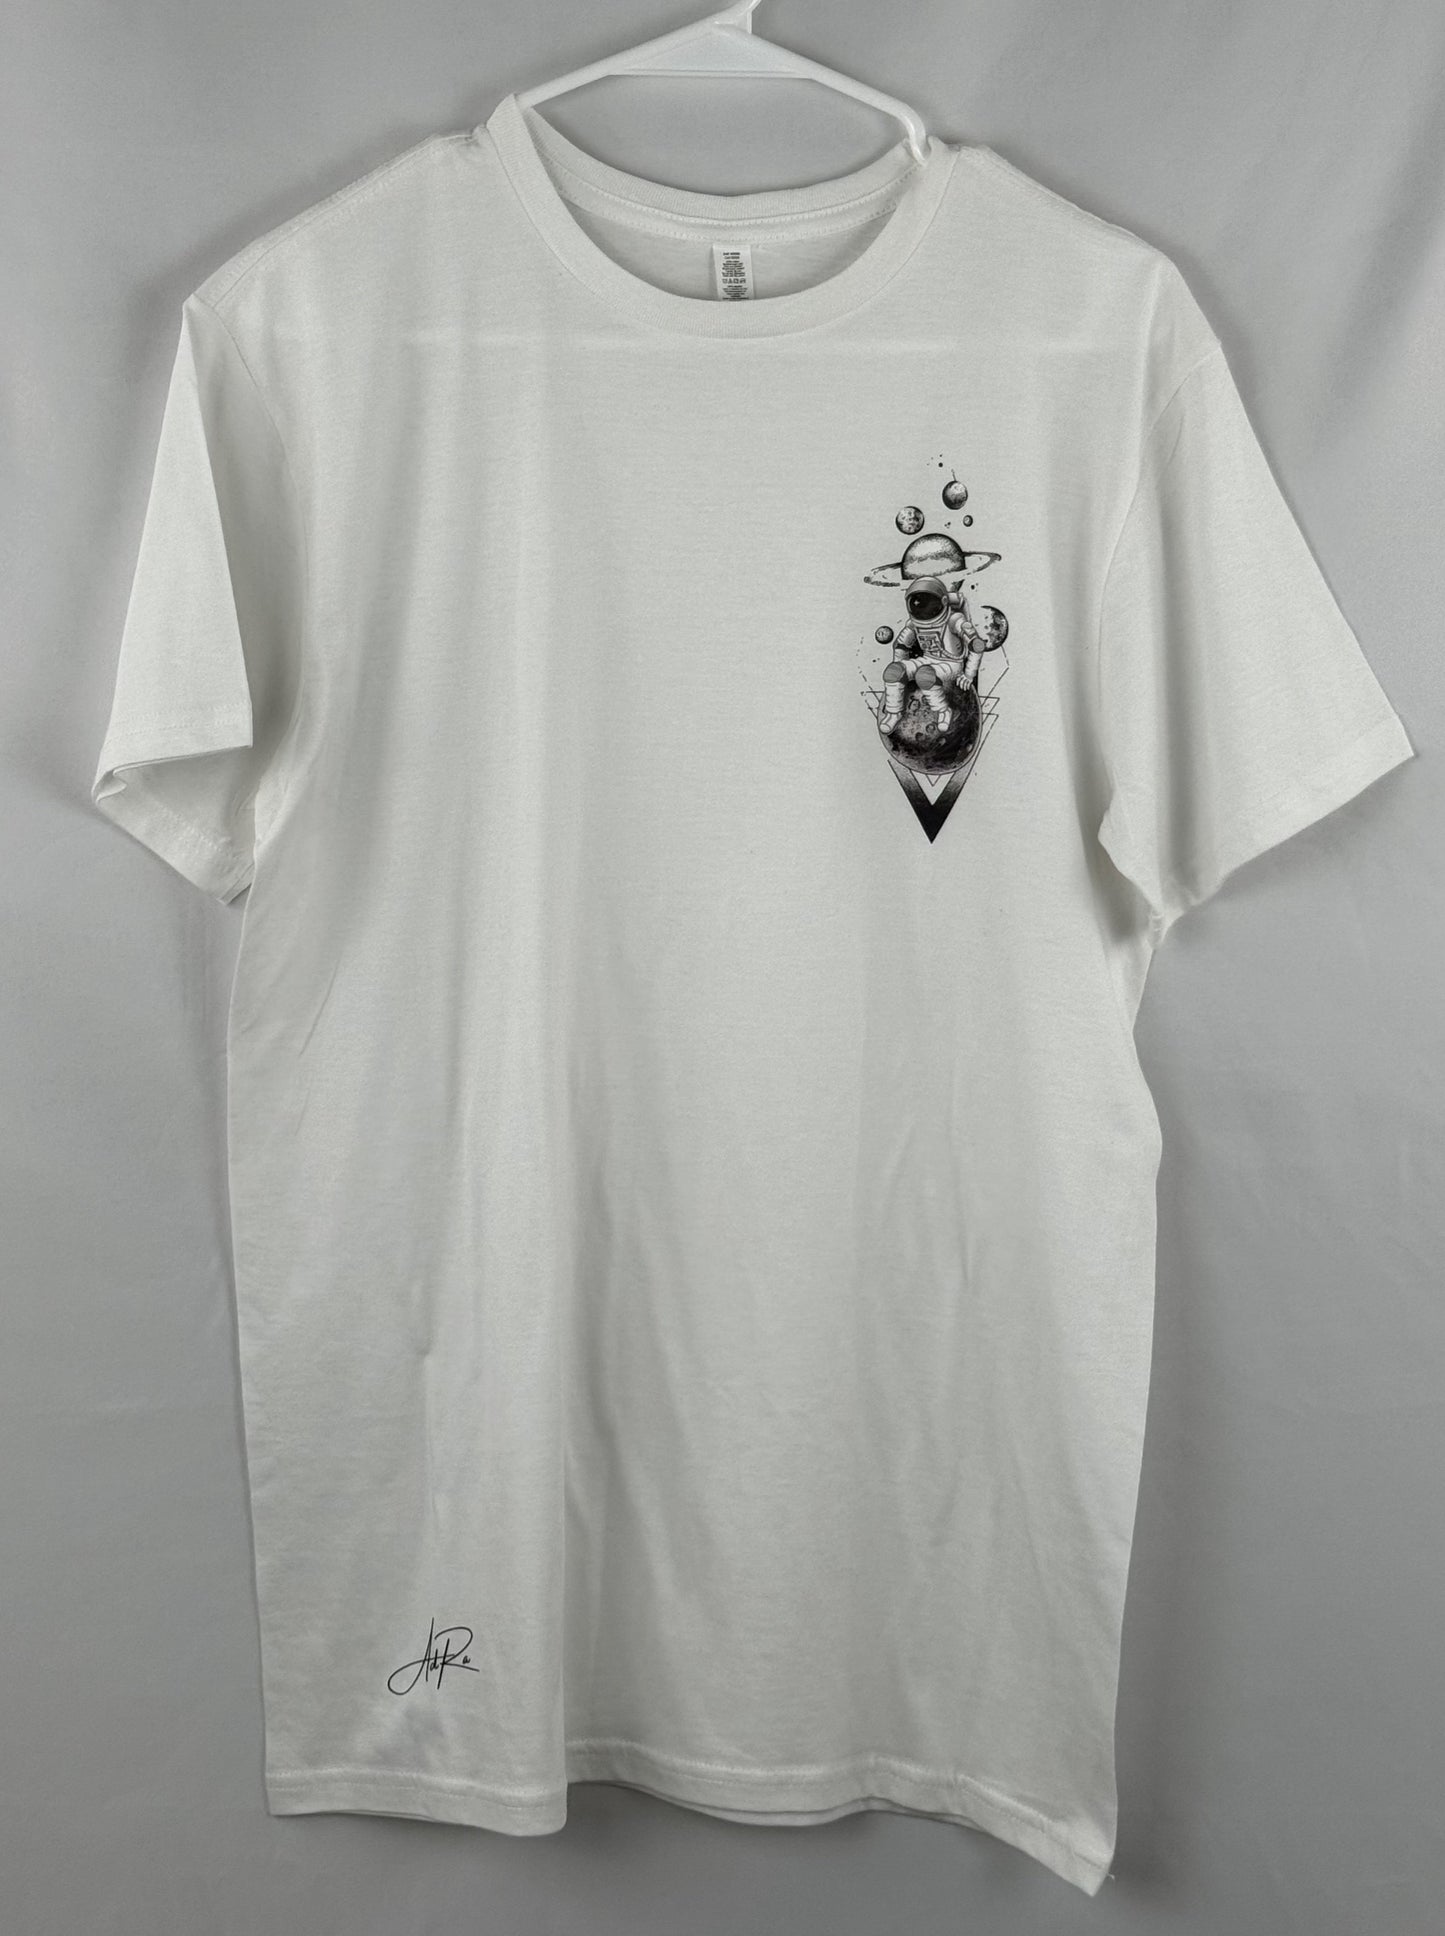 "Astronaut in Contemplation" Tee - Explore the Universe with AdRa Apparel